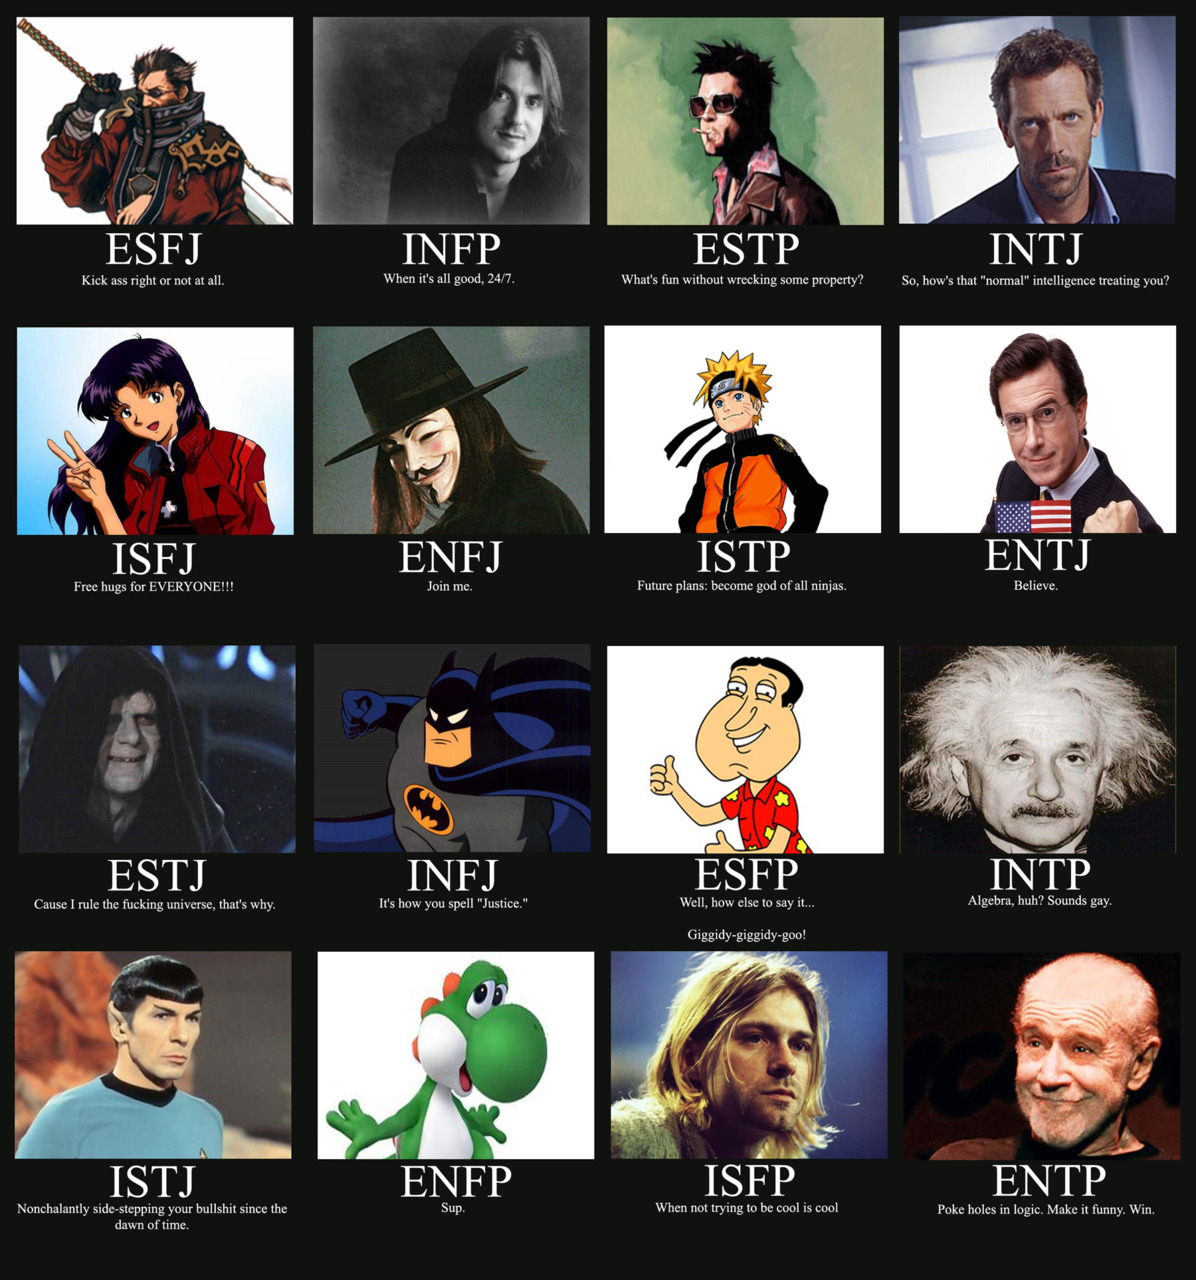 Where Do You Fall on the Star Wars Myers Briggs?